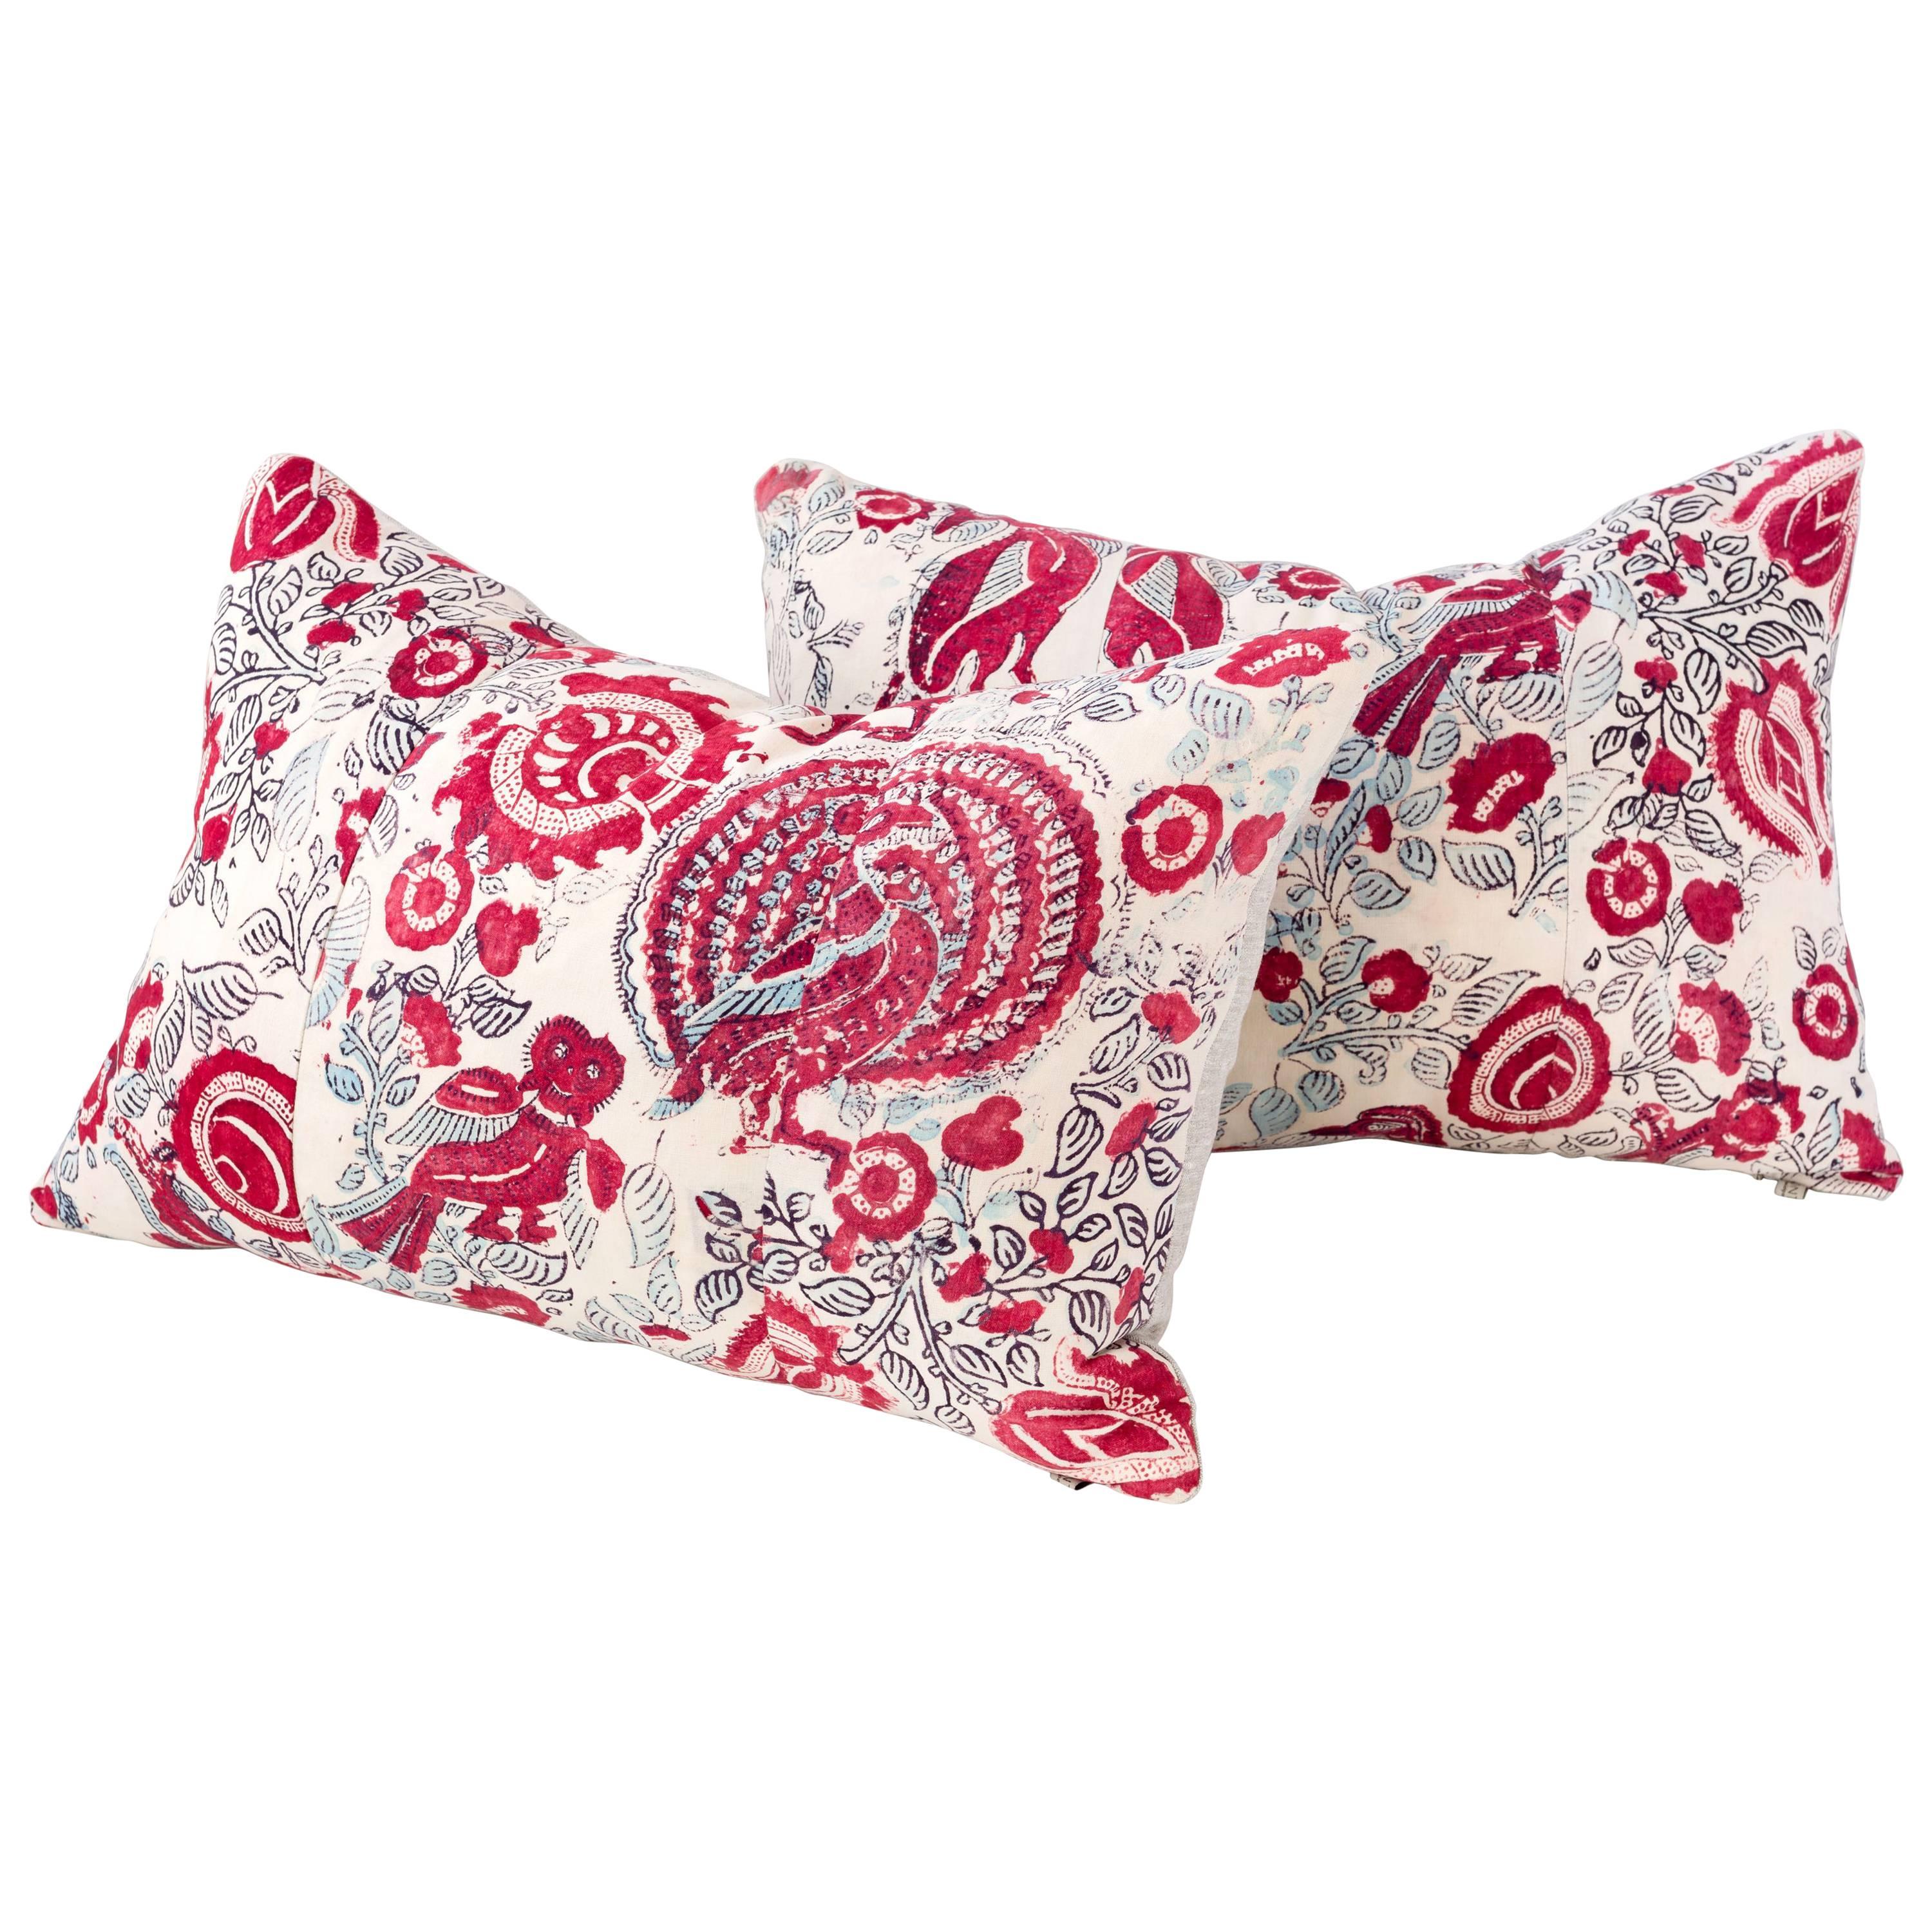 Early 20th Century Indian Block Print Pillow- Red and Light Blue